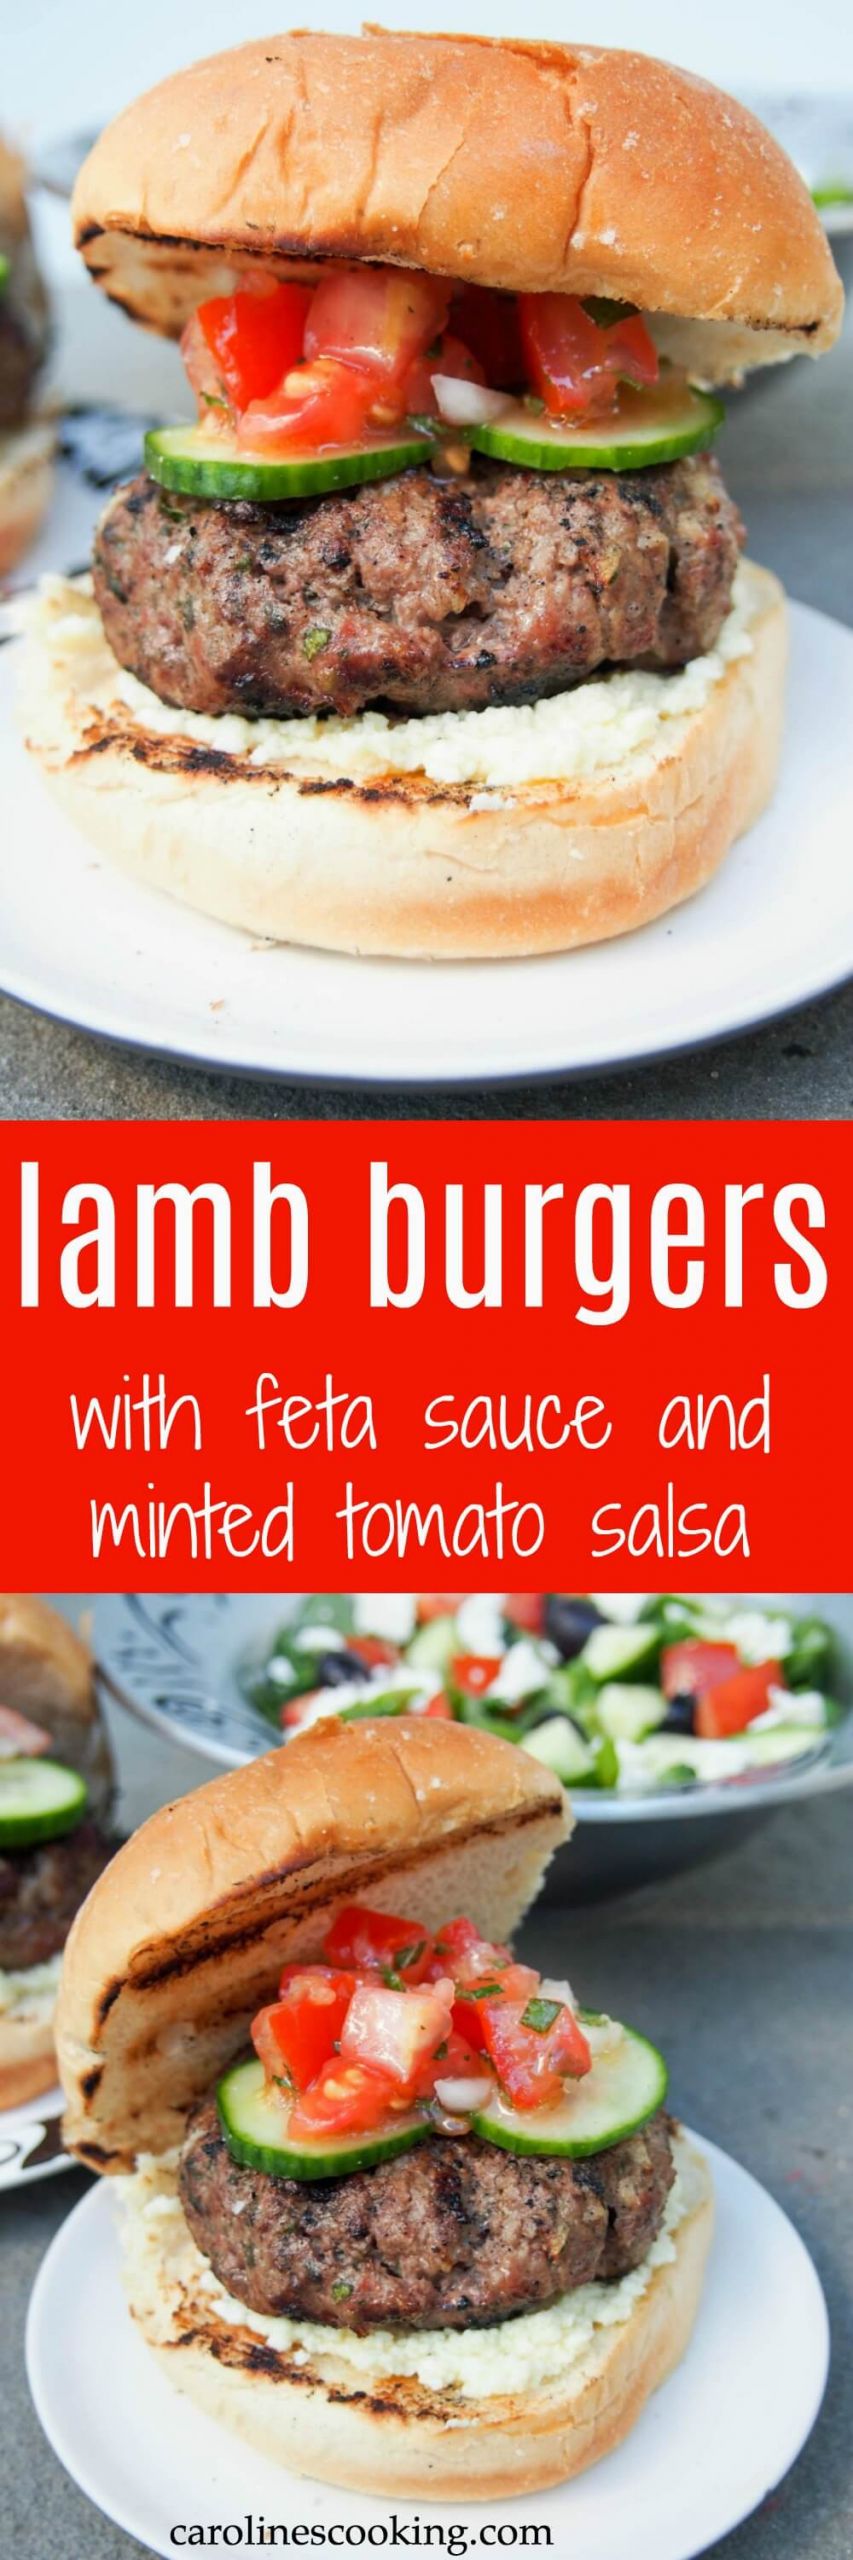 Sauces For Lamb Burgers
 Lamb burgers with feta sauce and minted tomato salsa